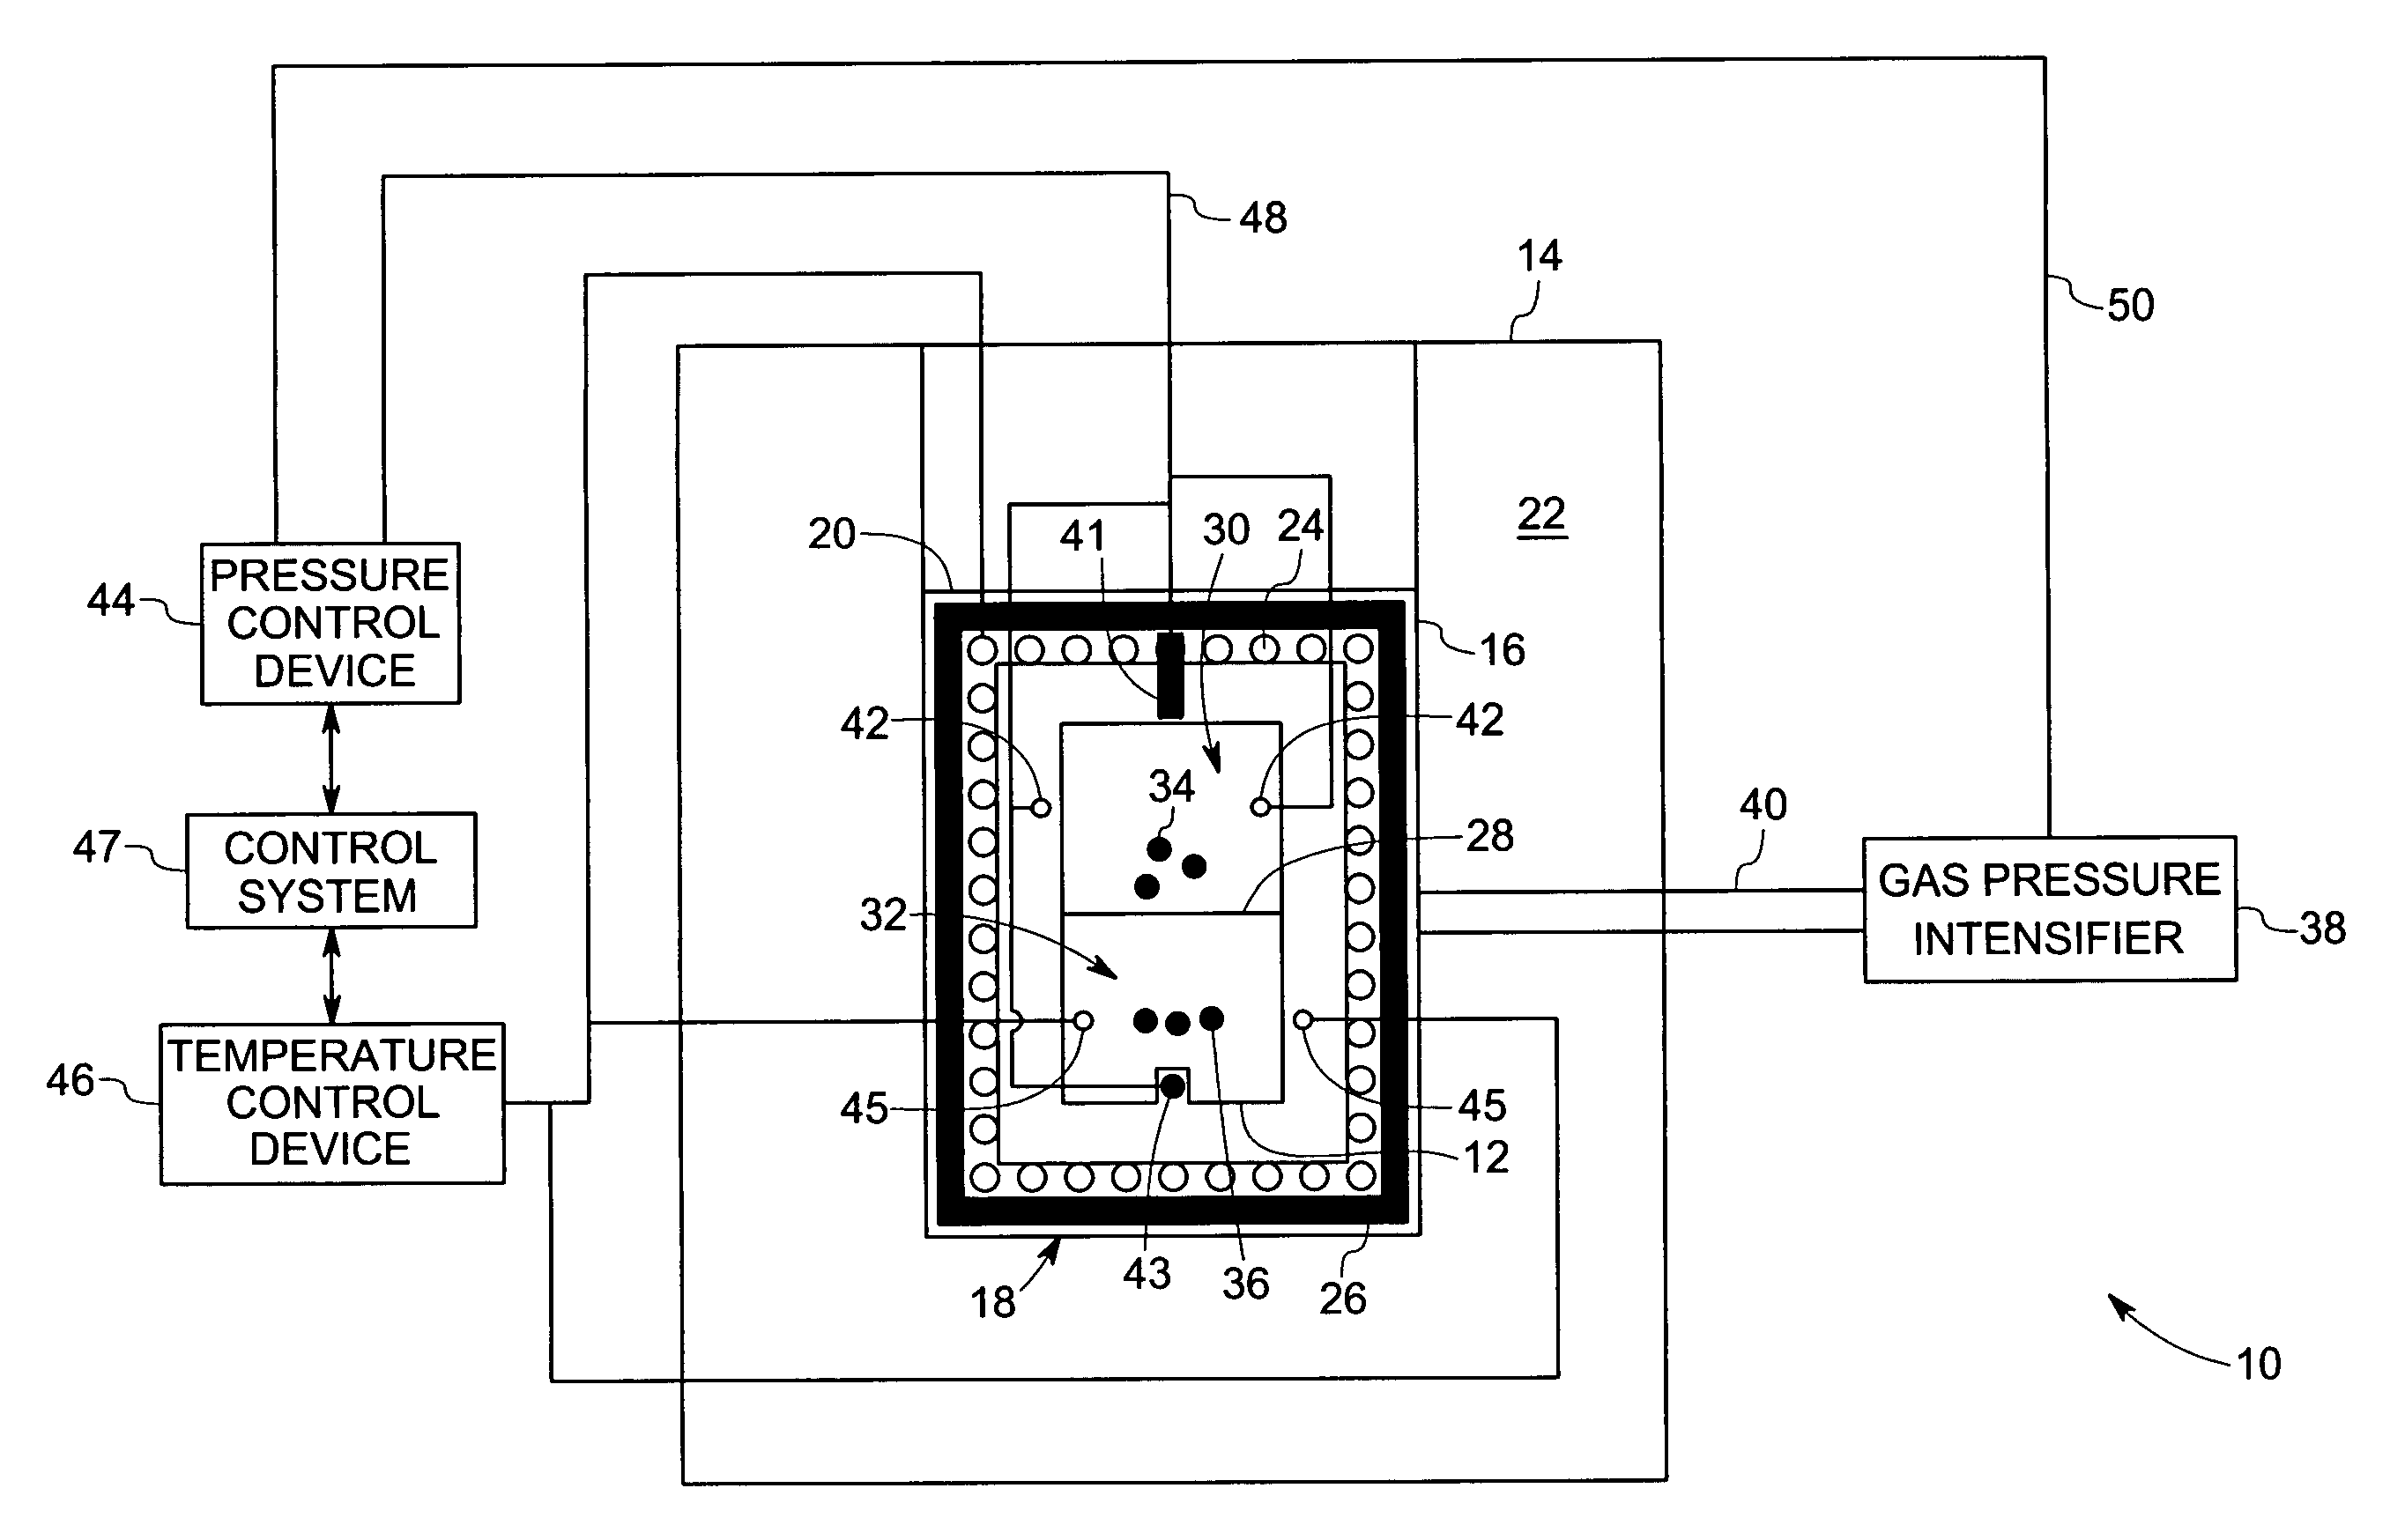 Apparatus for processing materials in supercritical fluids and methods thereof